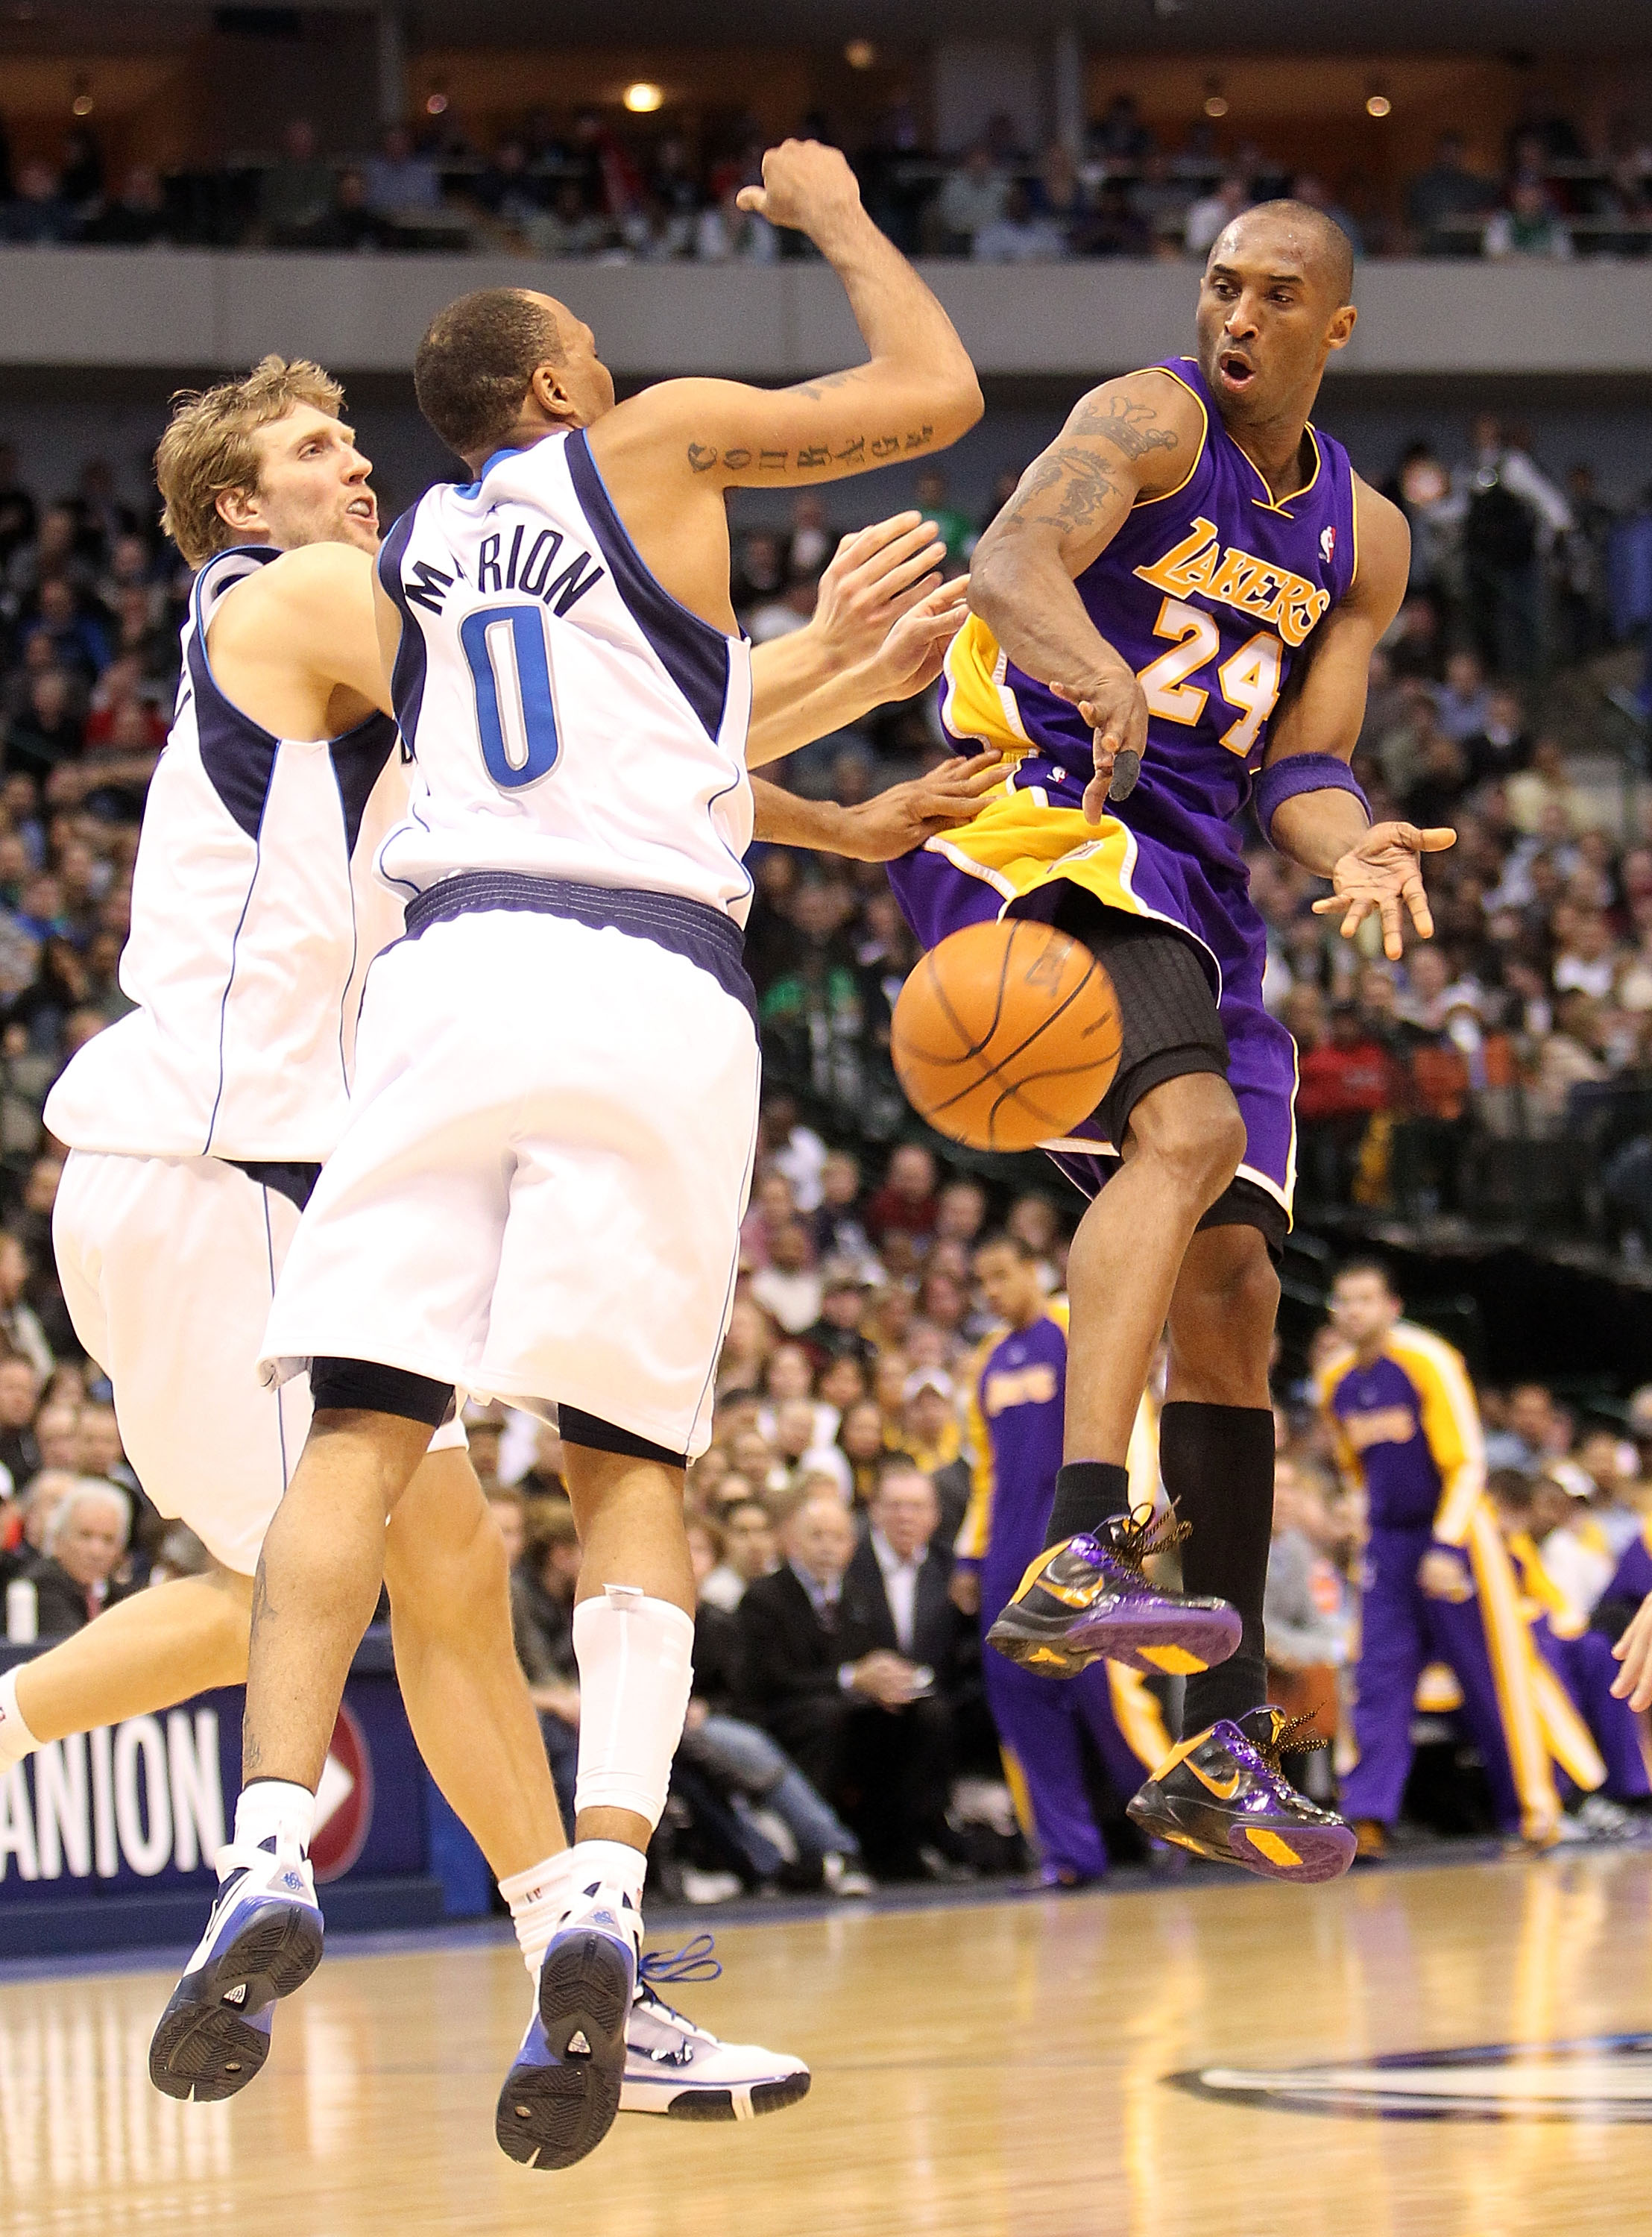 DALLAS - FEBRUARY 24:  Kobe Bryant #24 of the Los Angeles Lakers passes against Dirk Nowitzki #41 and Shawn Marion #0 of the Dallas Mavericks on February 24, 2010 at American Airlines Center in Dallas, Texas.  NOTE TO USER: User expressly acknowledges and